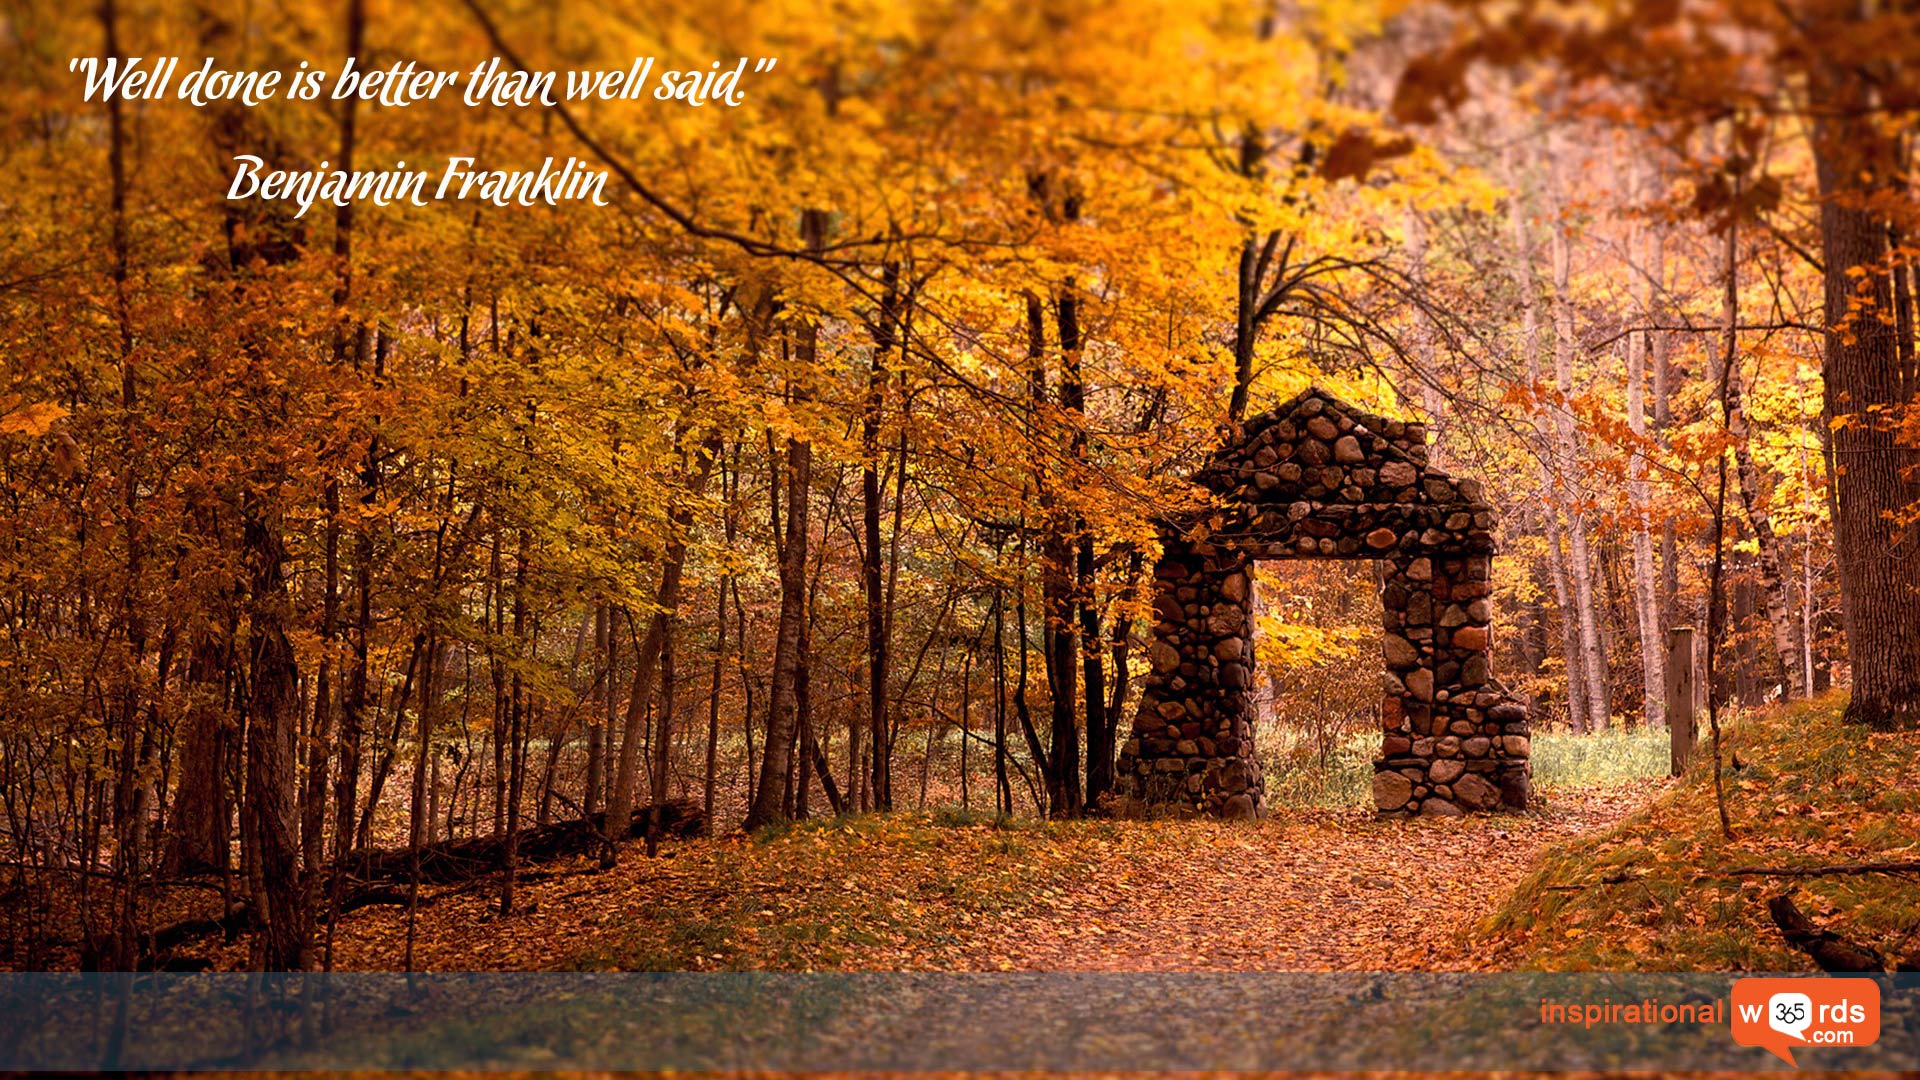 Inspirational Wallpaper Quote by Benjamin Franklin